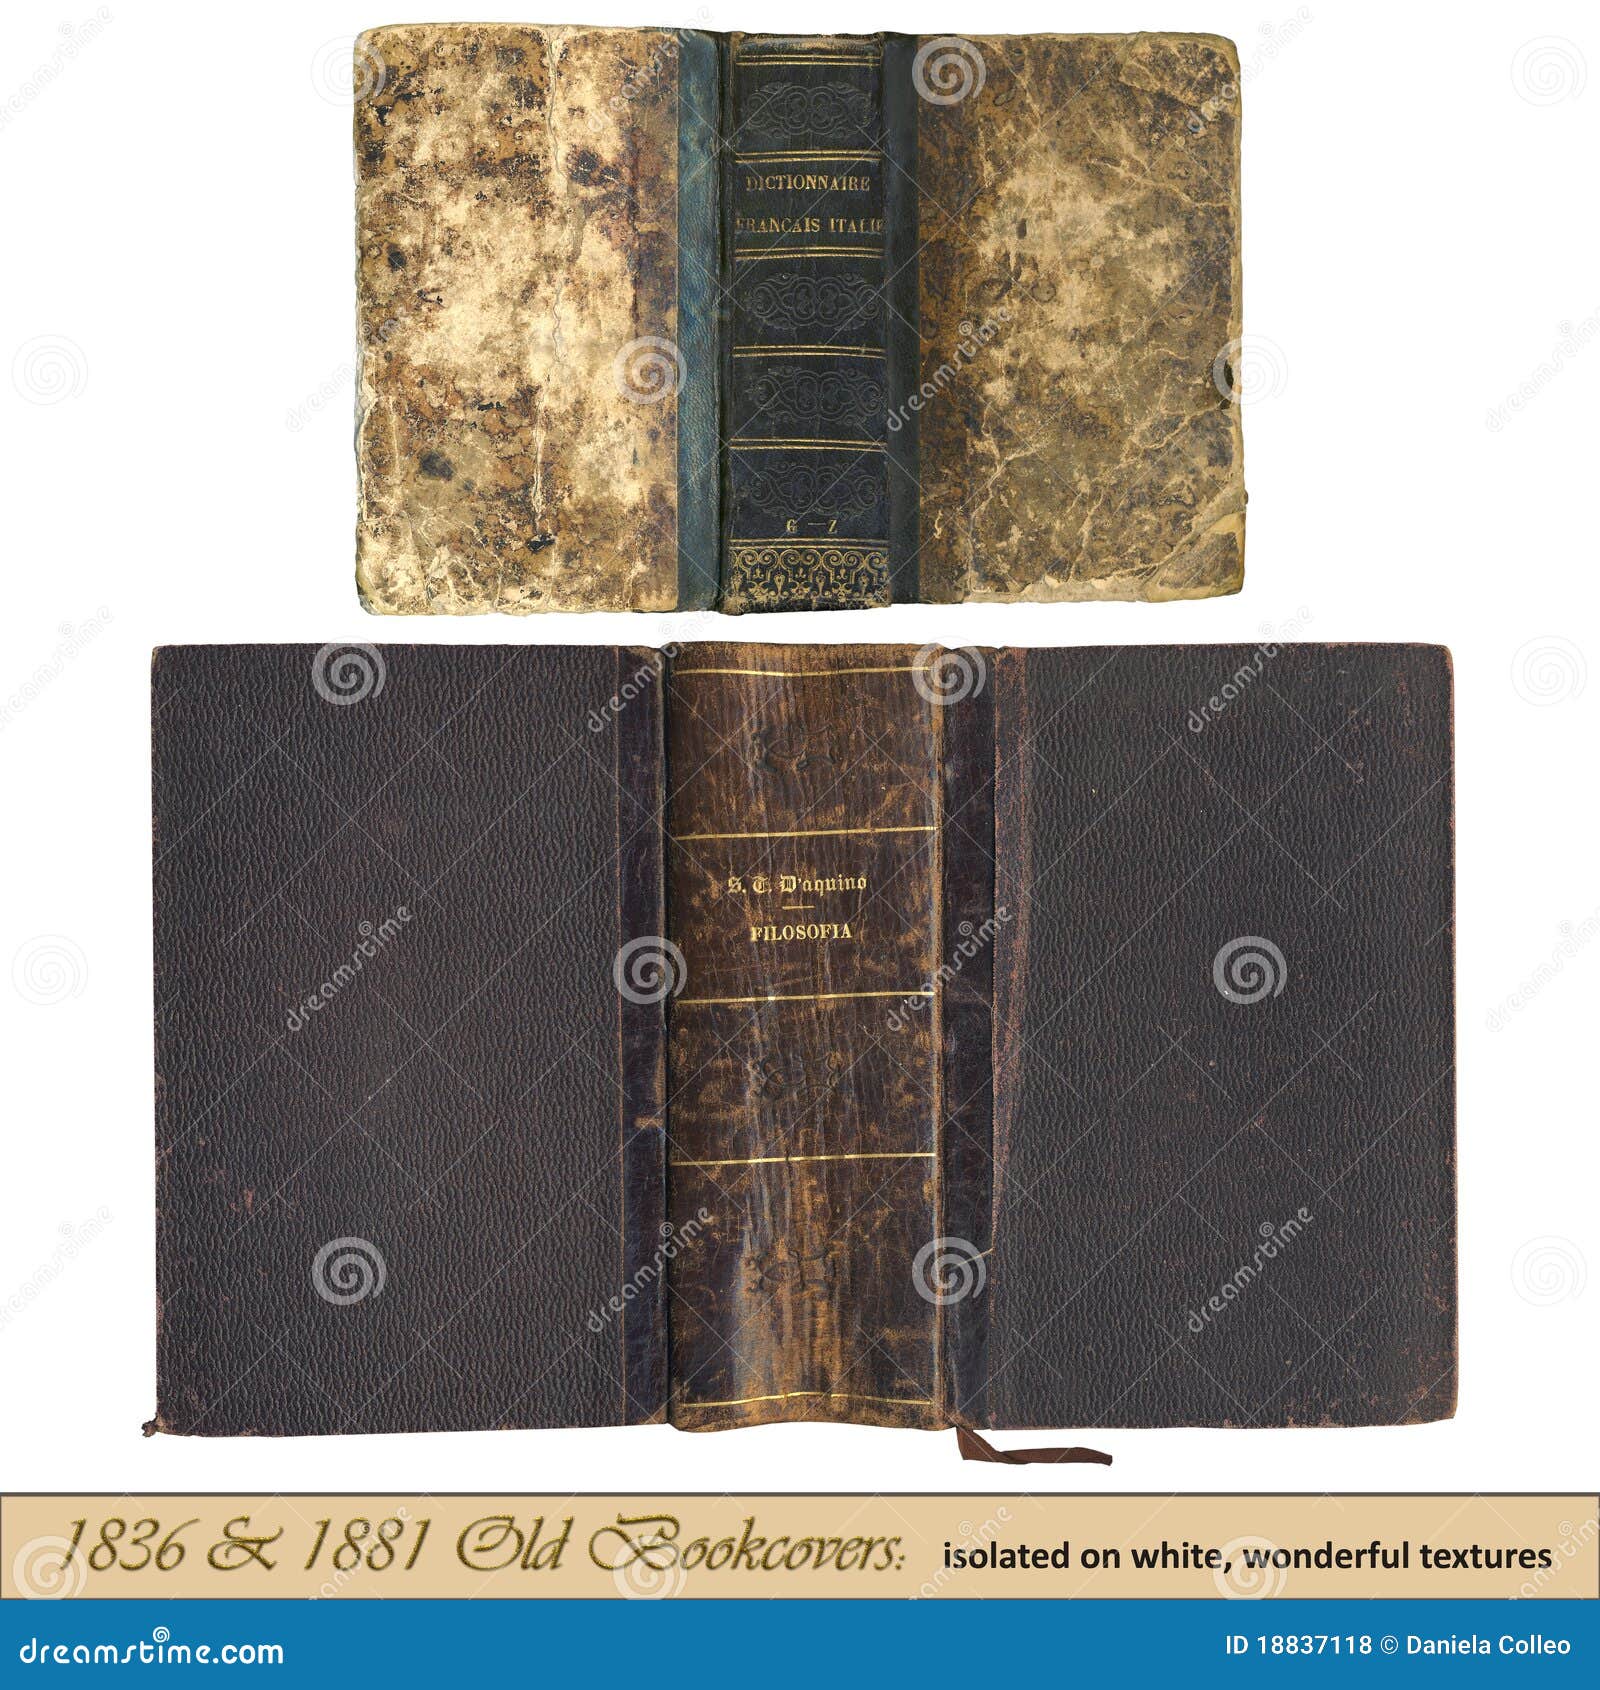 1836 & 1881 old bookcovers